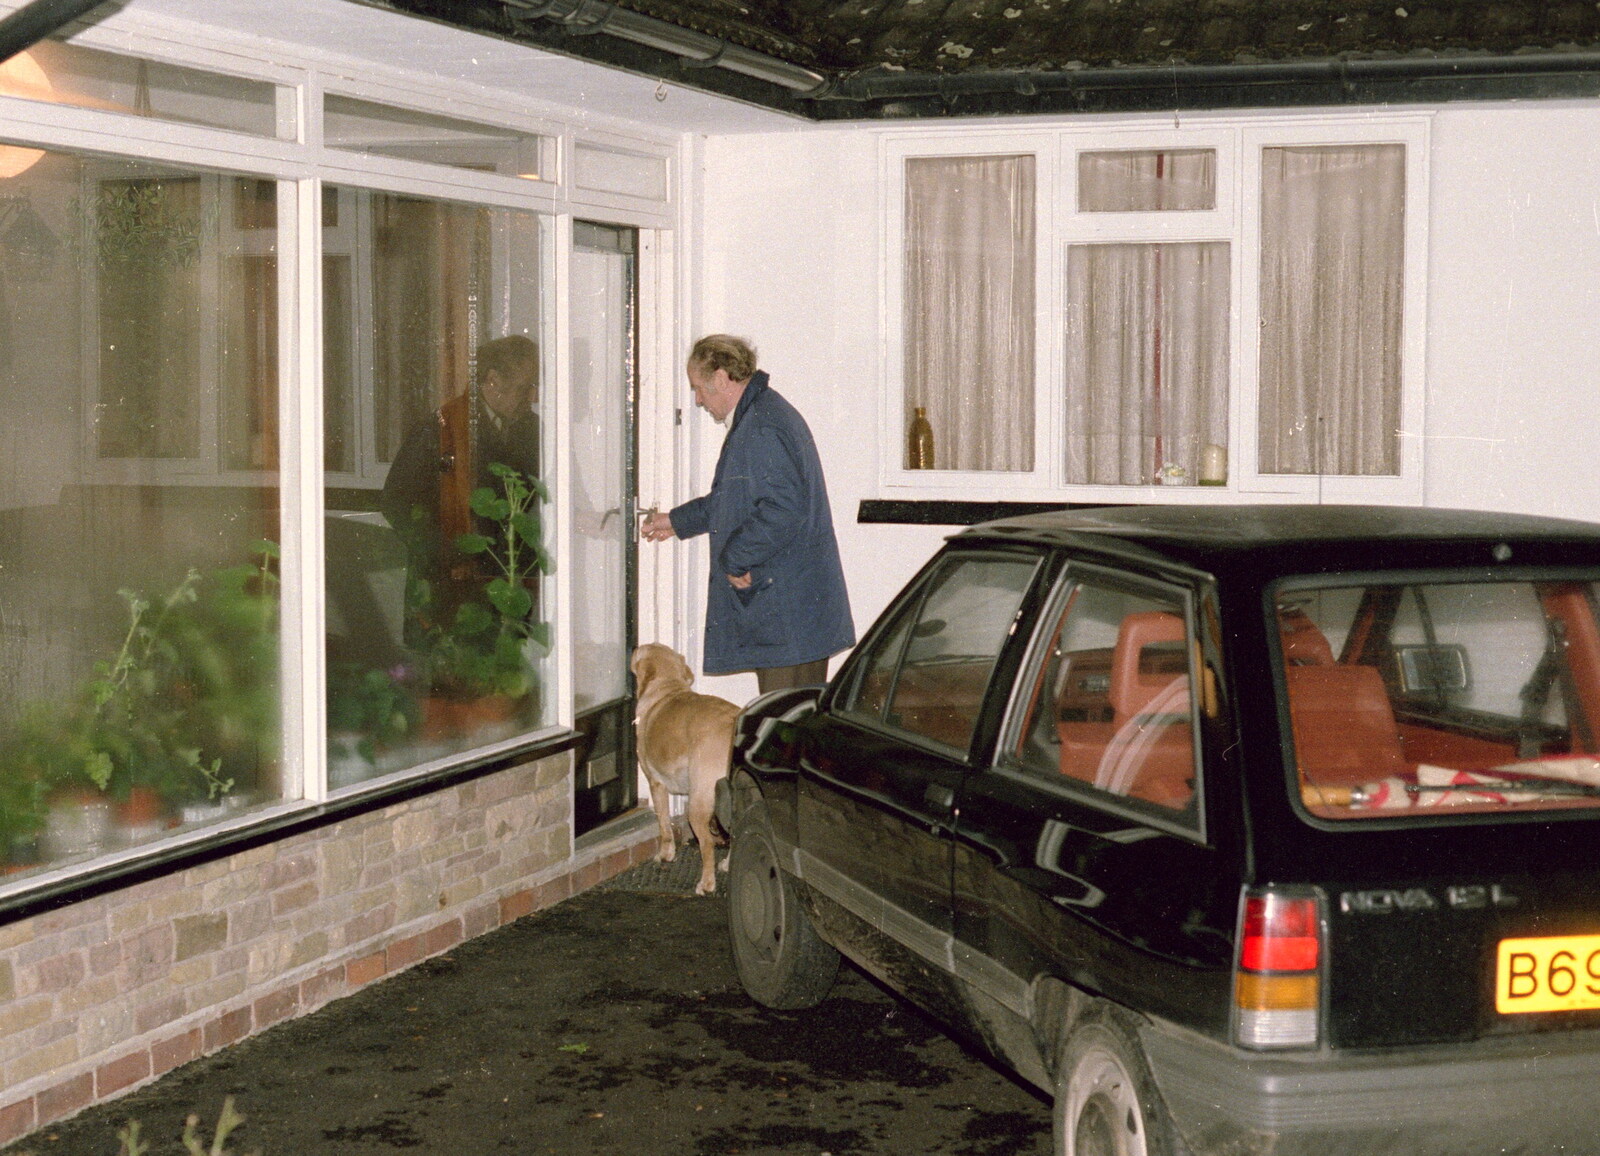 The Old Chap opens the front door from Christmas in Macclesfield and Wetherby, Cheshire  and Yorkshire - 25th December 1985